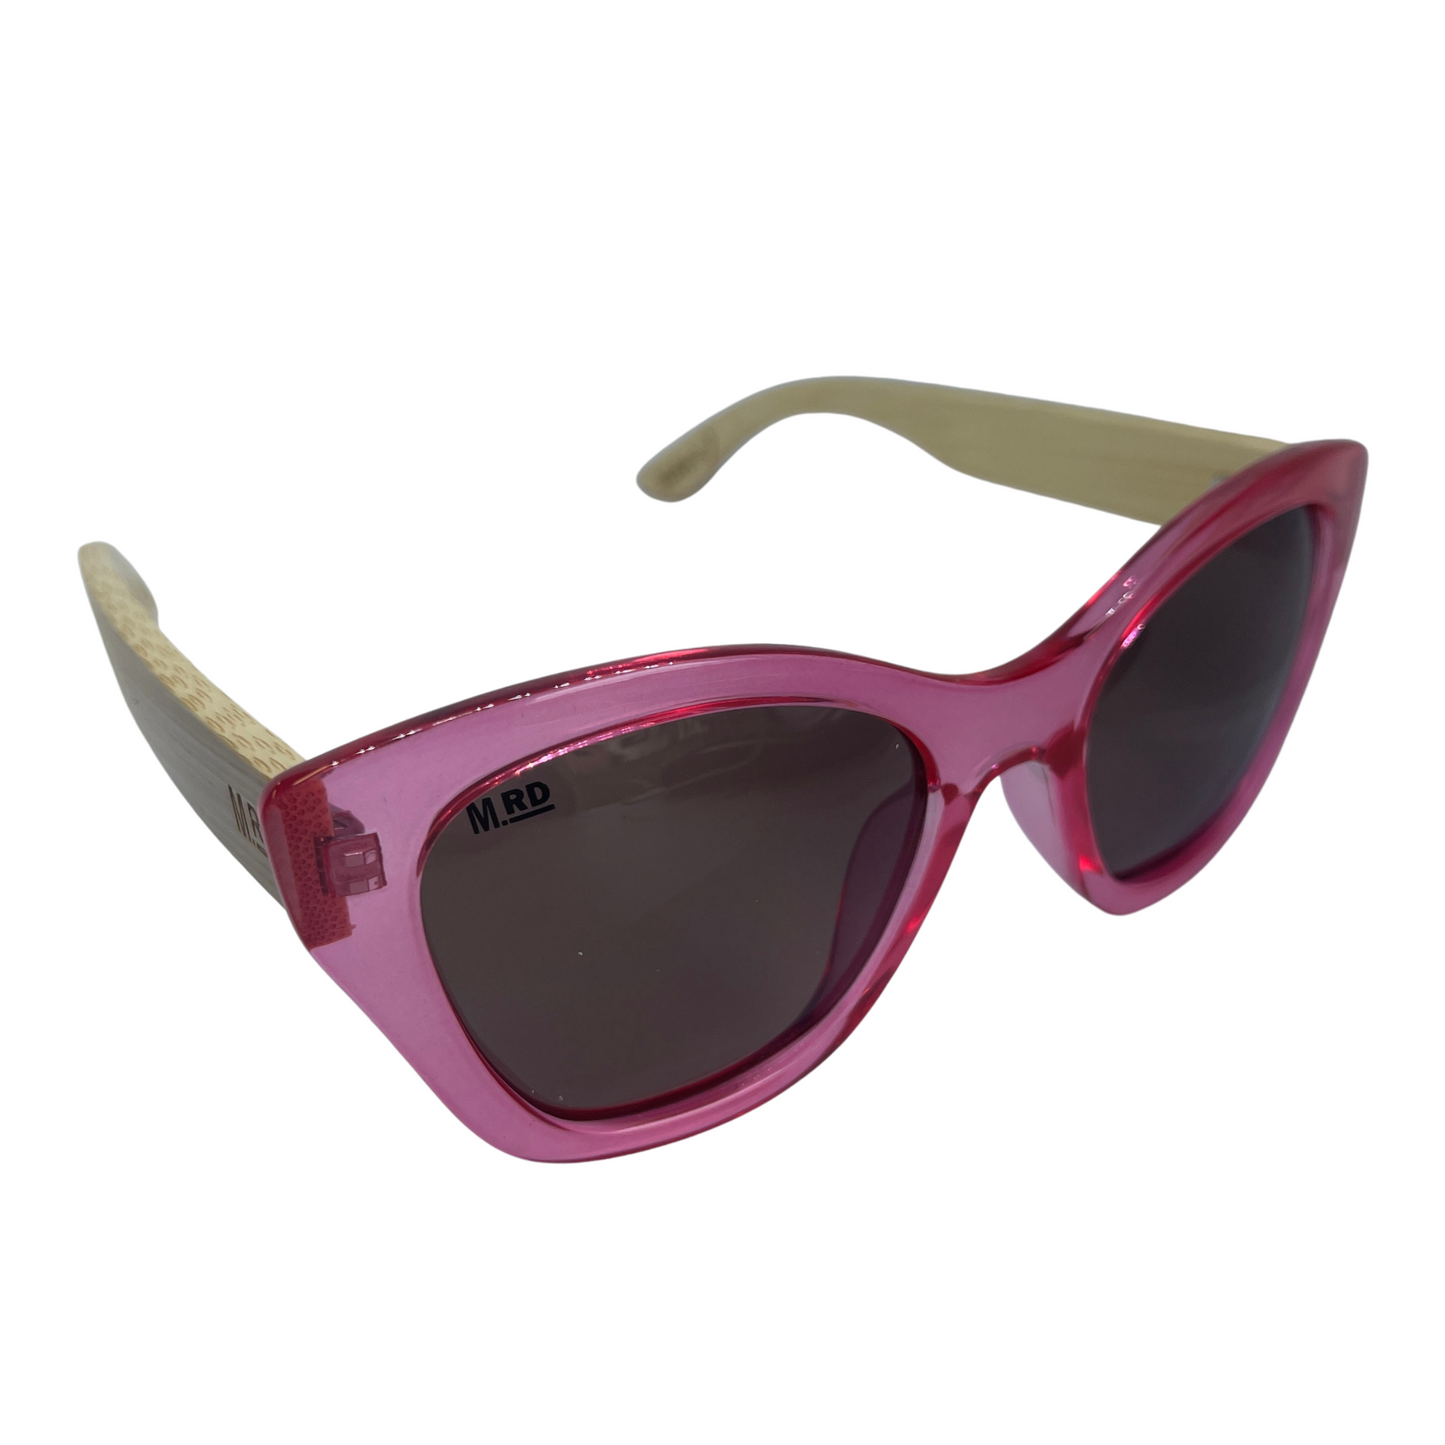 Womens sunglasses with pink frame and bamboo arms.